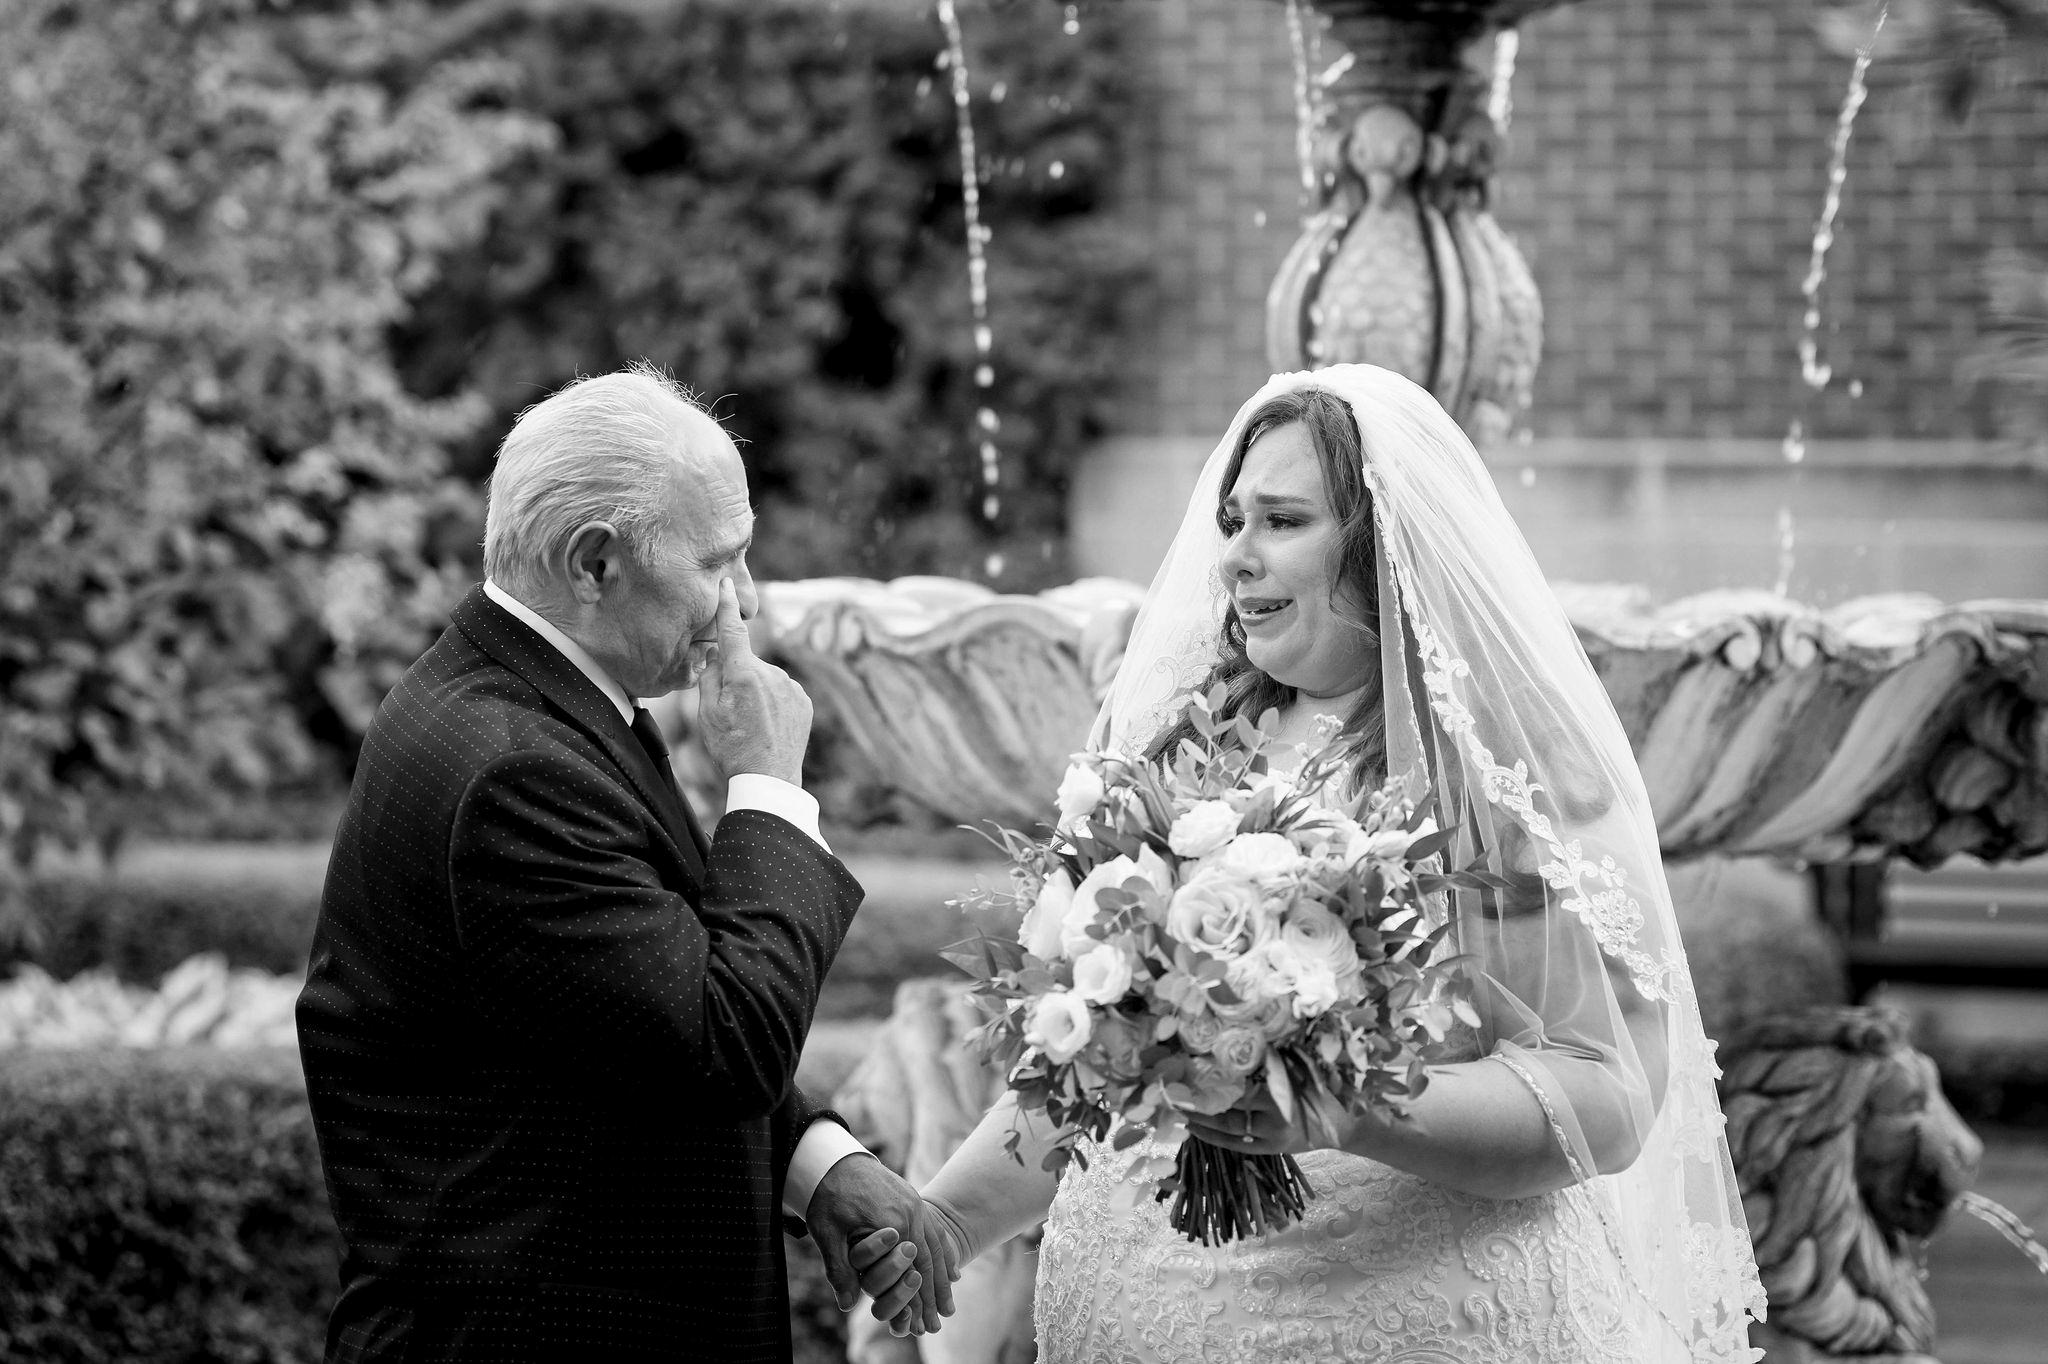 A dad wipes away a tear while his daughter, the bride, also cries after seeing each other for the first time on her wedding day.  